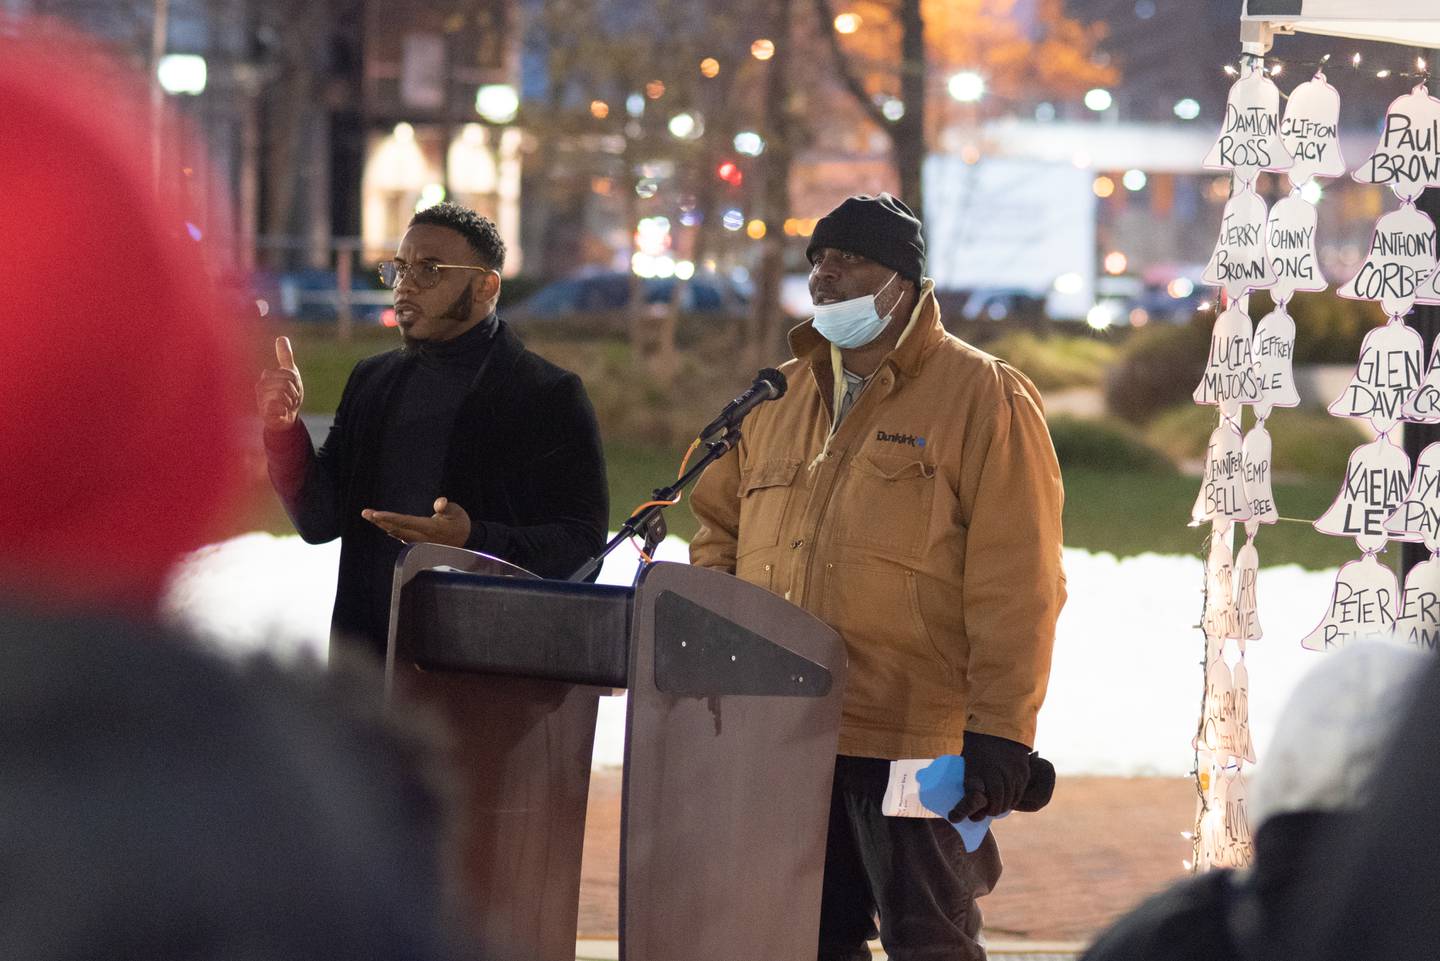 Mark Council, right, is accompanied by an ASL interpreter as he welcomes attendees to the 2nd annual Homeless Persons' Memorial Day service at McKeldin Square in Downtown Baltimore. Council is on the Healthcare for the Homeless board of directors.